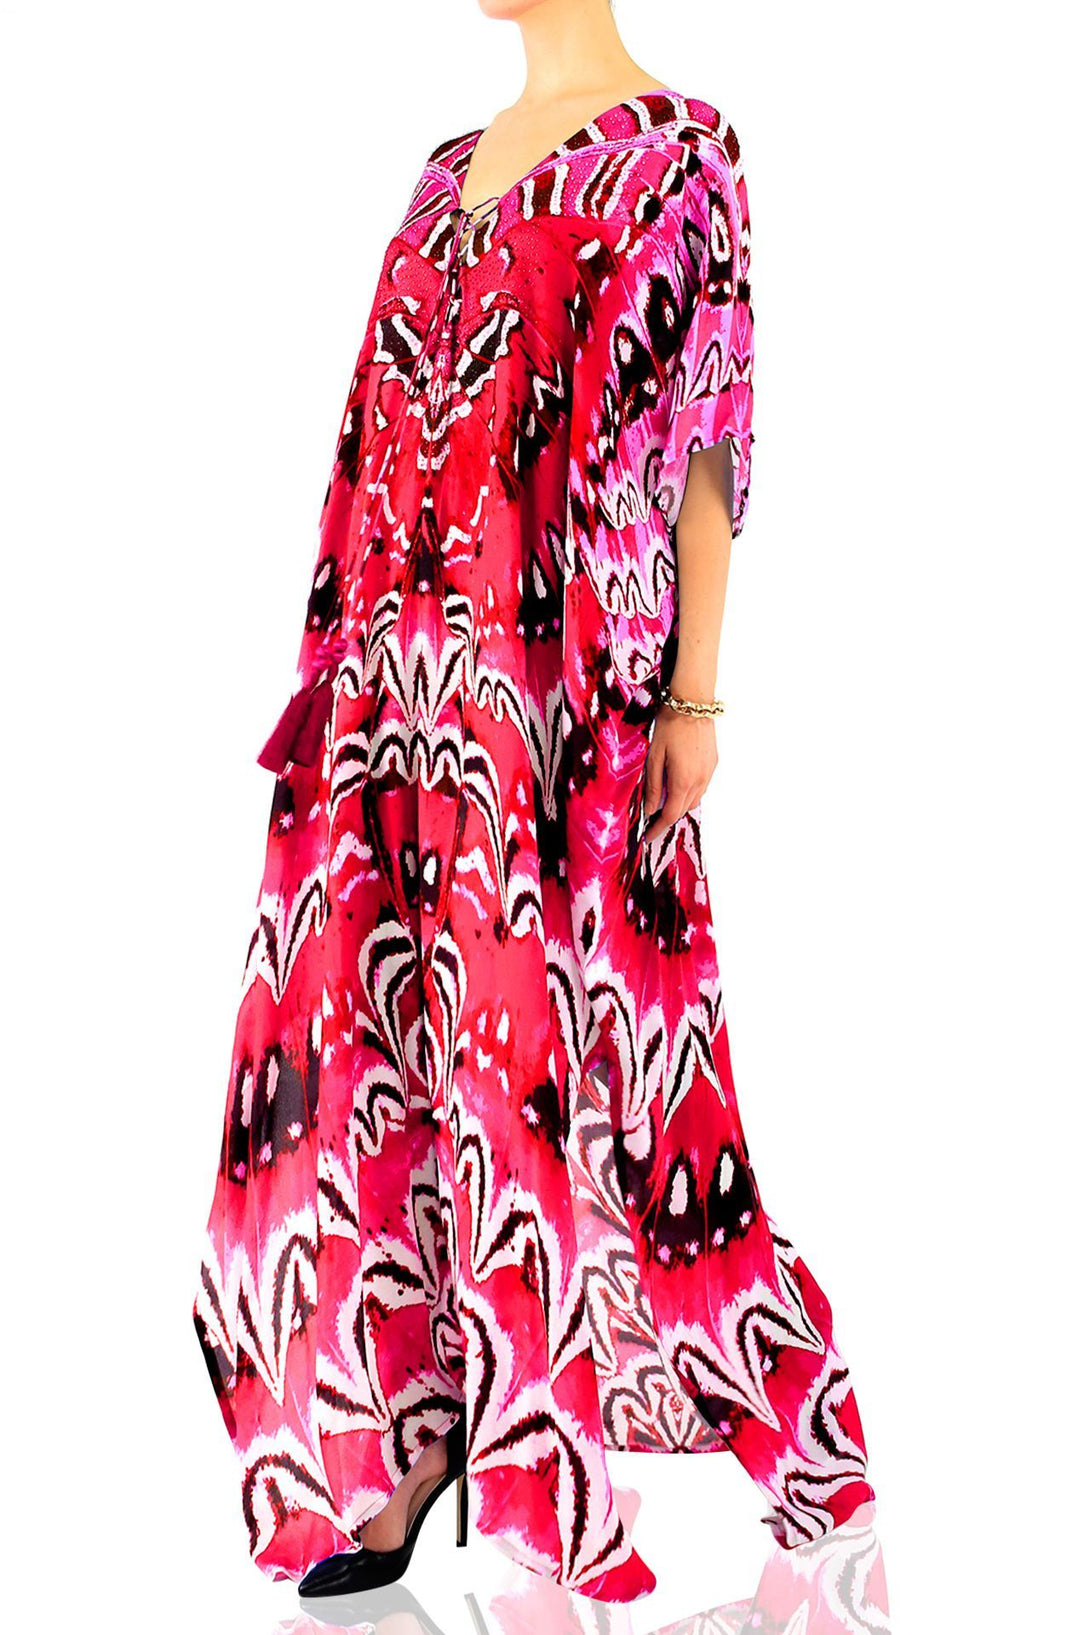 clothes for beach vacation, vacation outfits women, Shahida Parides, kaftan outfit, 